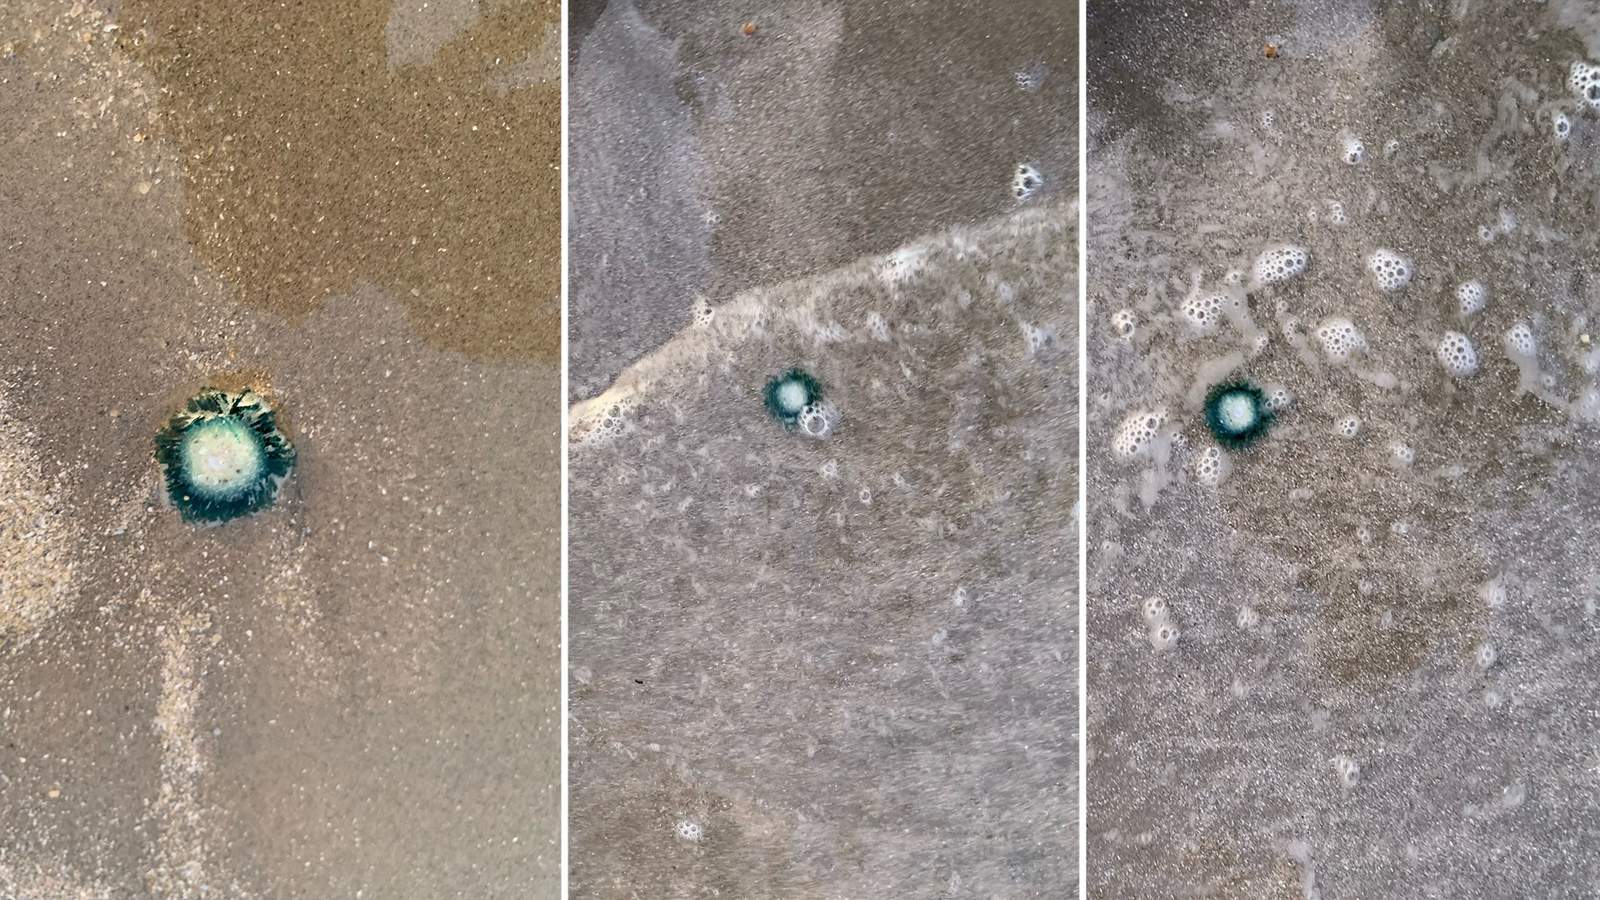 Blue button jellyfish spotted at Texas beaches